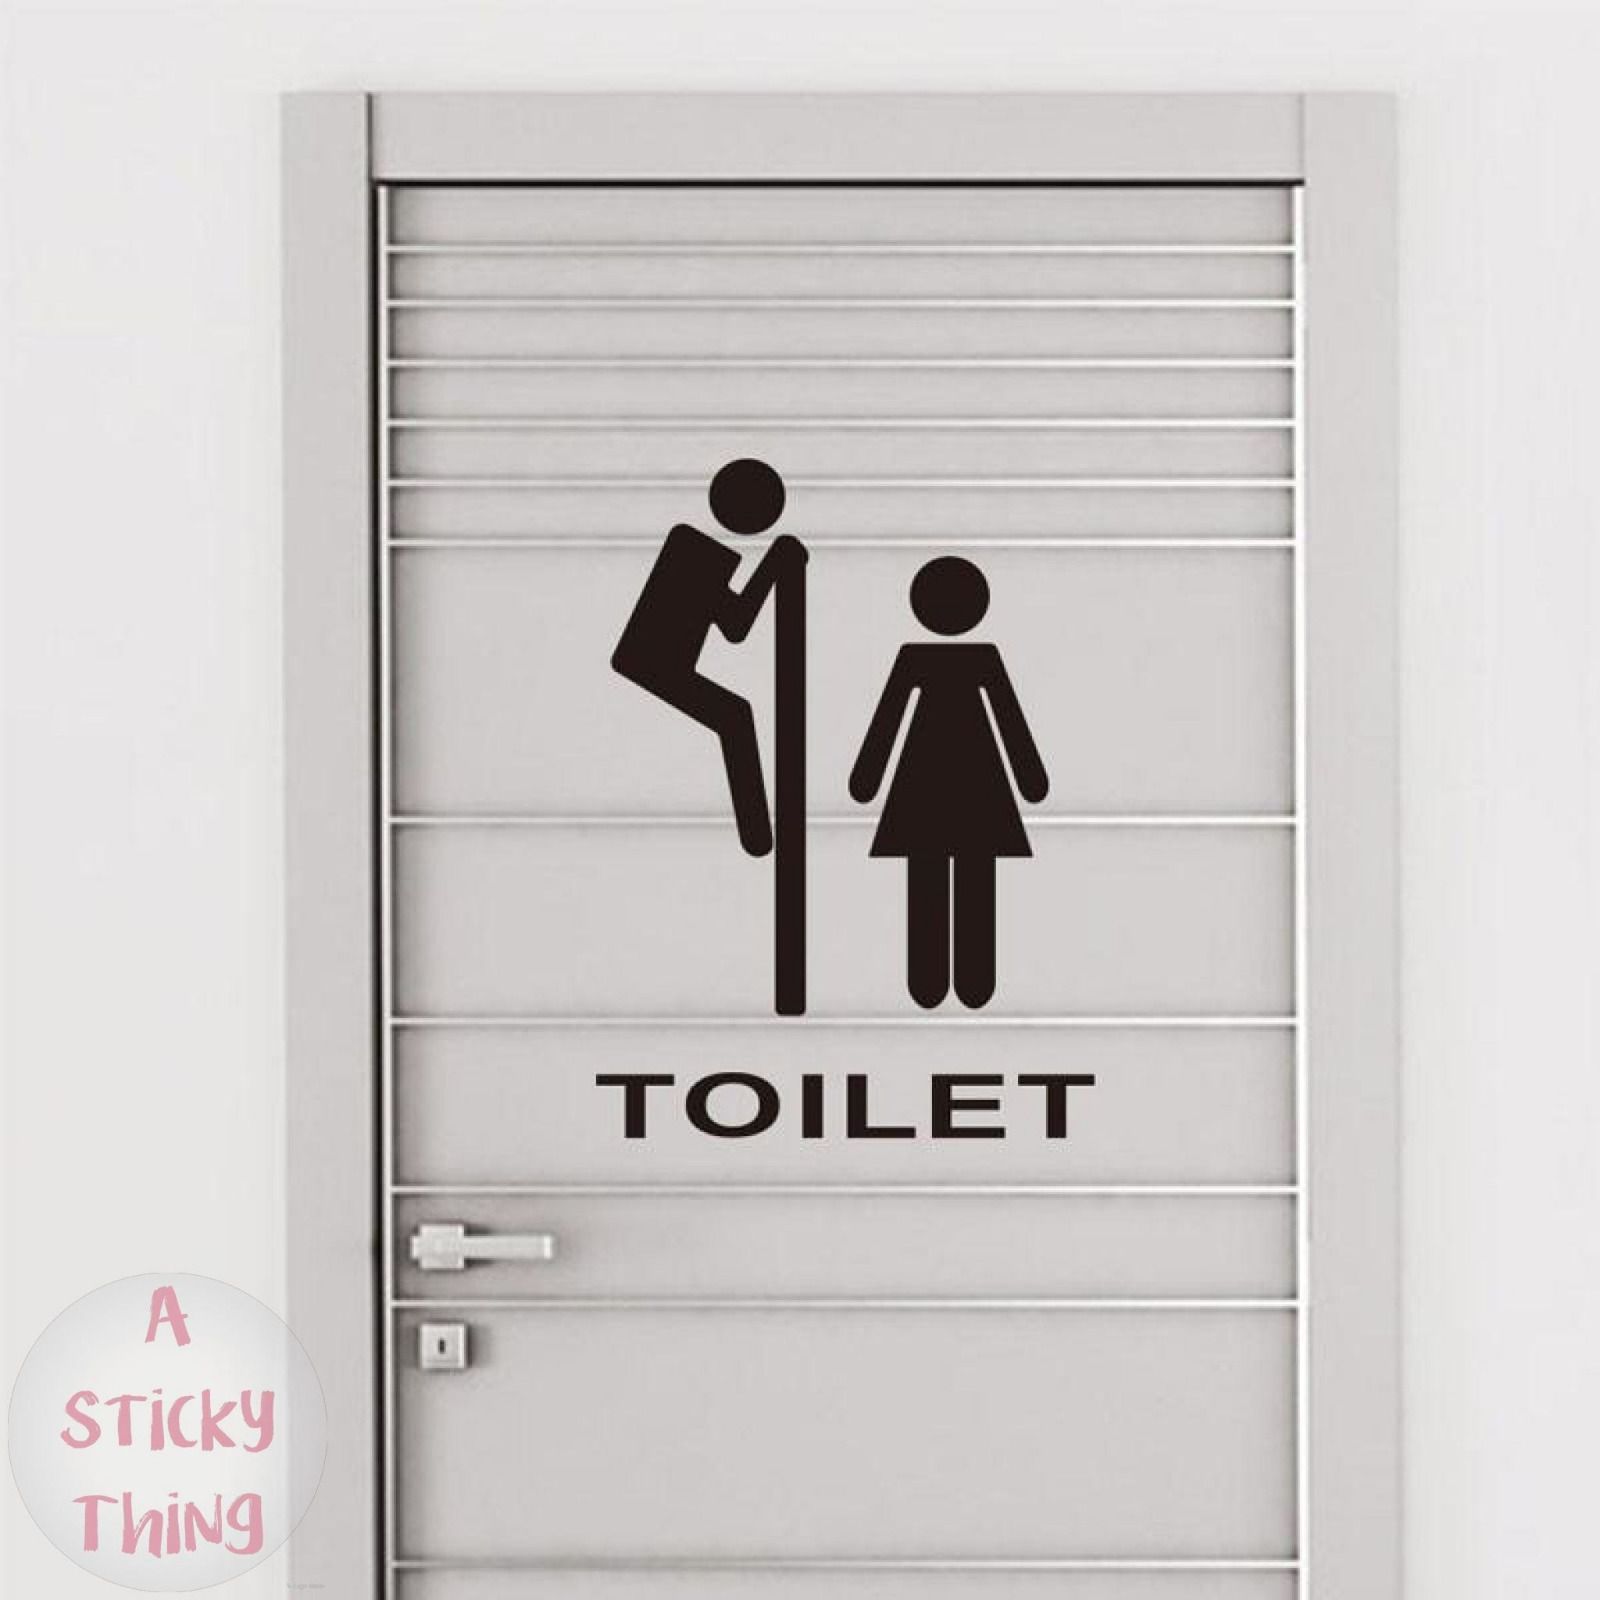 Toilet Seat Wall Sticker Decals Vinyl Removable Funny Bathroom-Decor UK SELLER